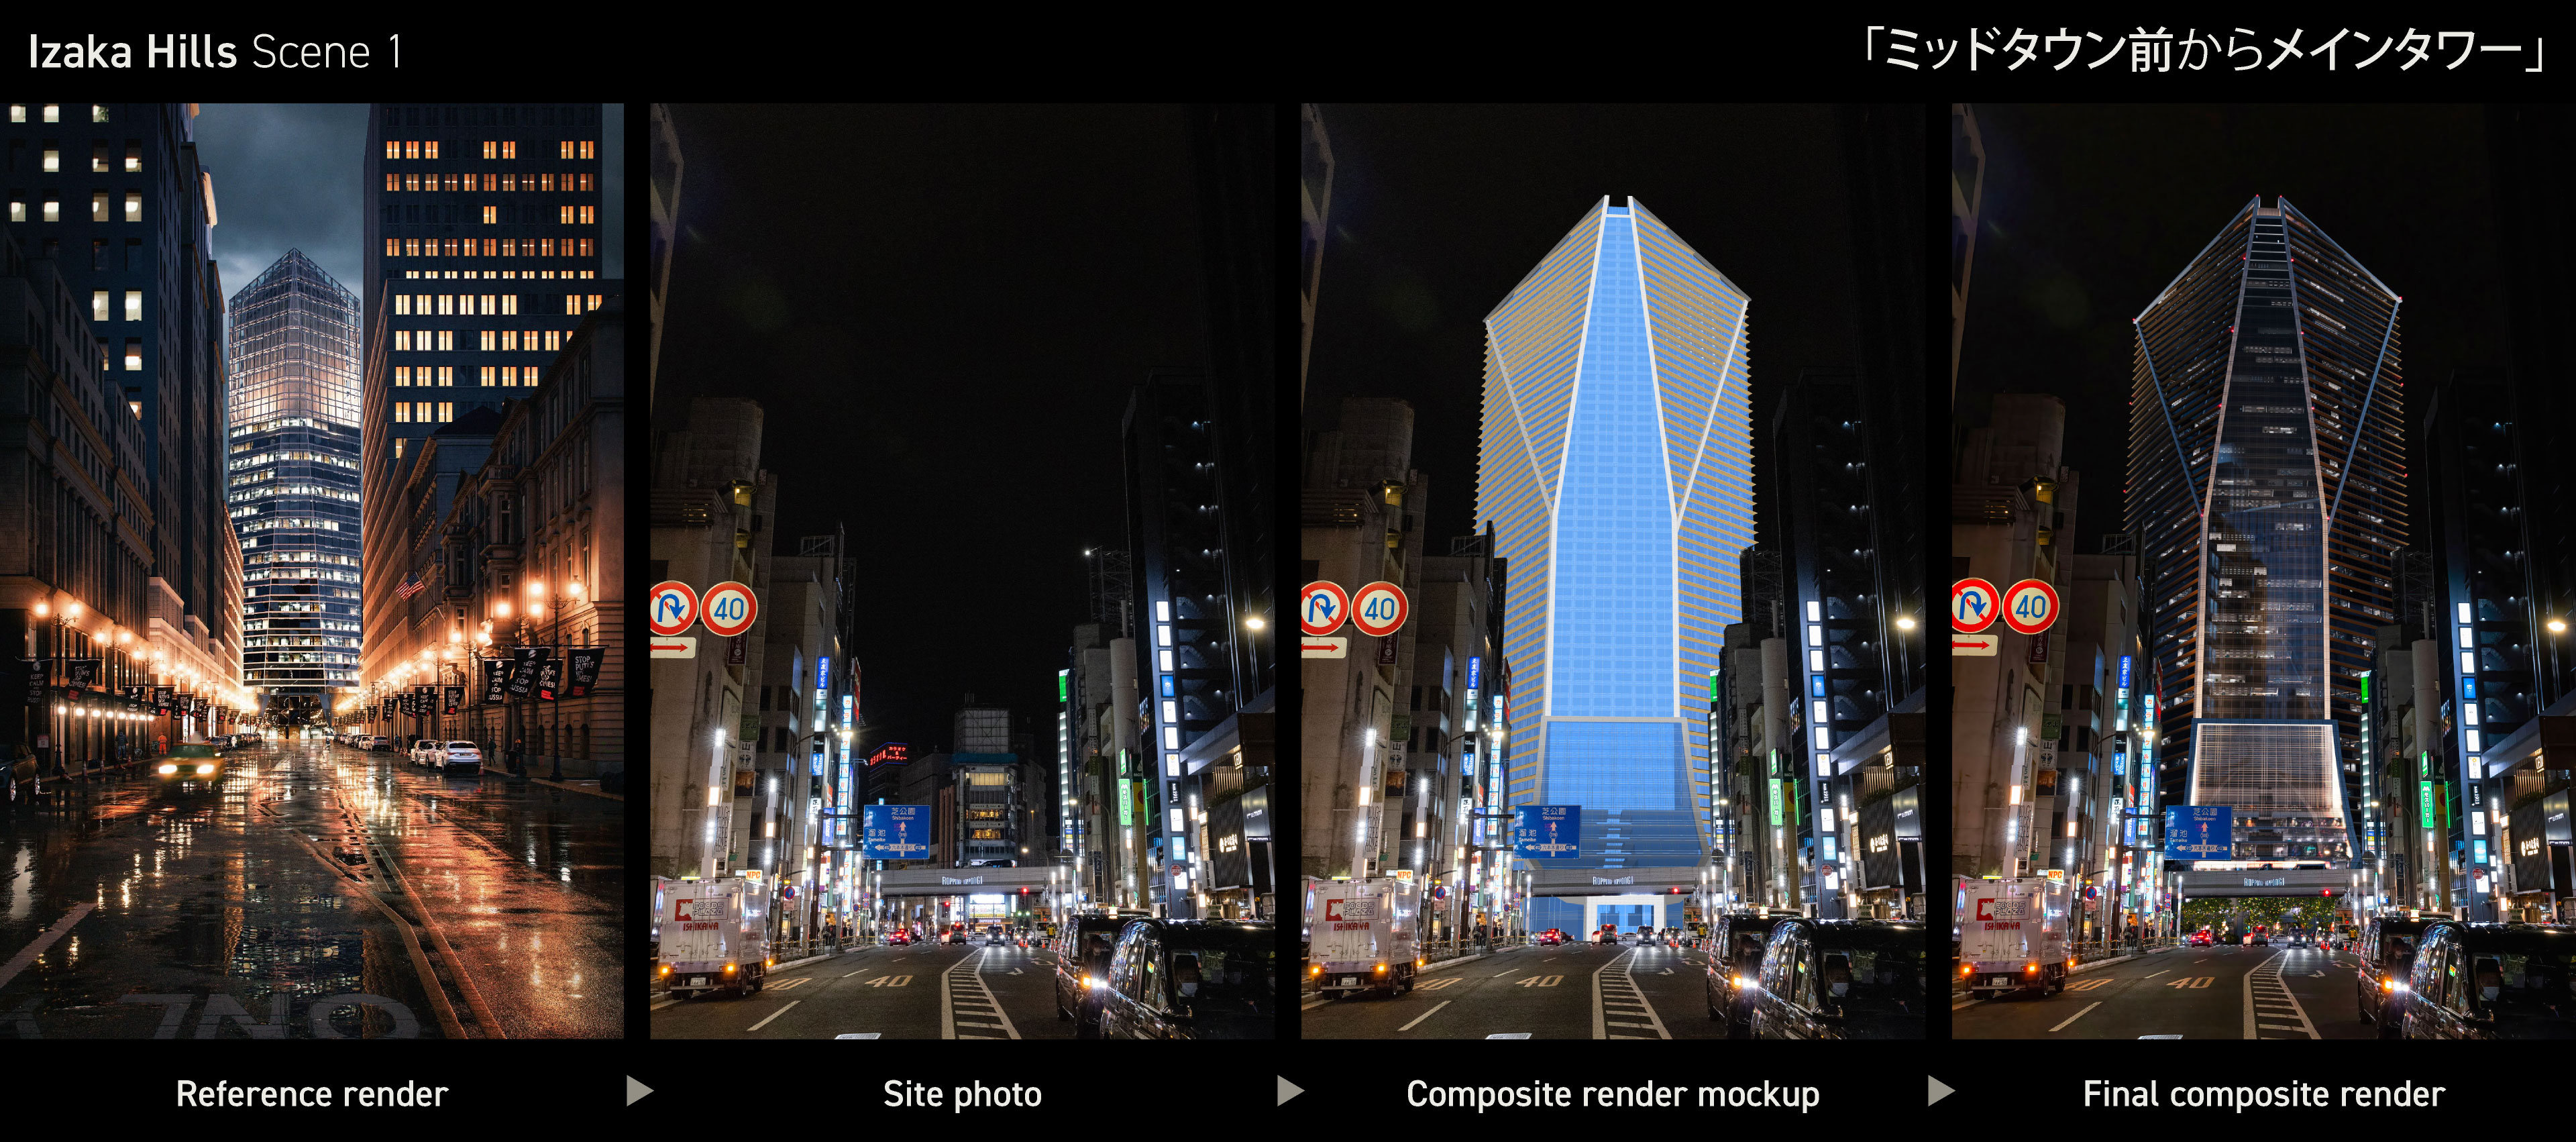 Process of creating the render showing Izaka Hills' Main Tower along Gaien Higashi Dori from in front of Tokyo Midtown